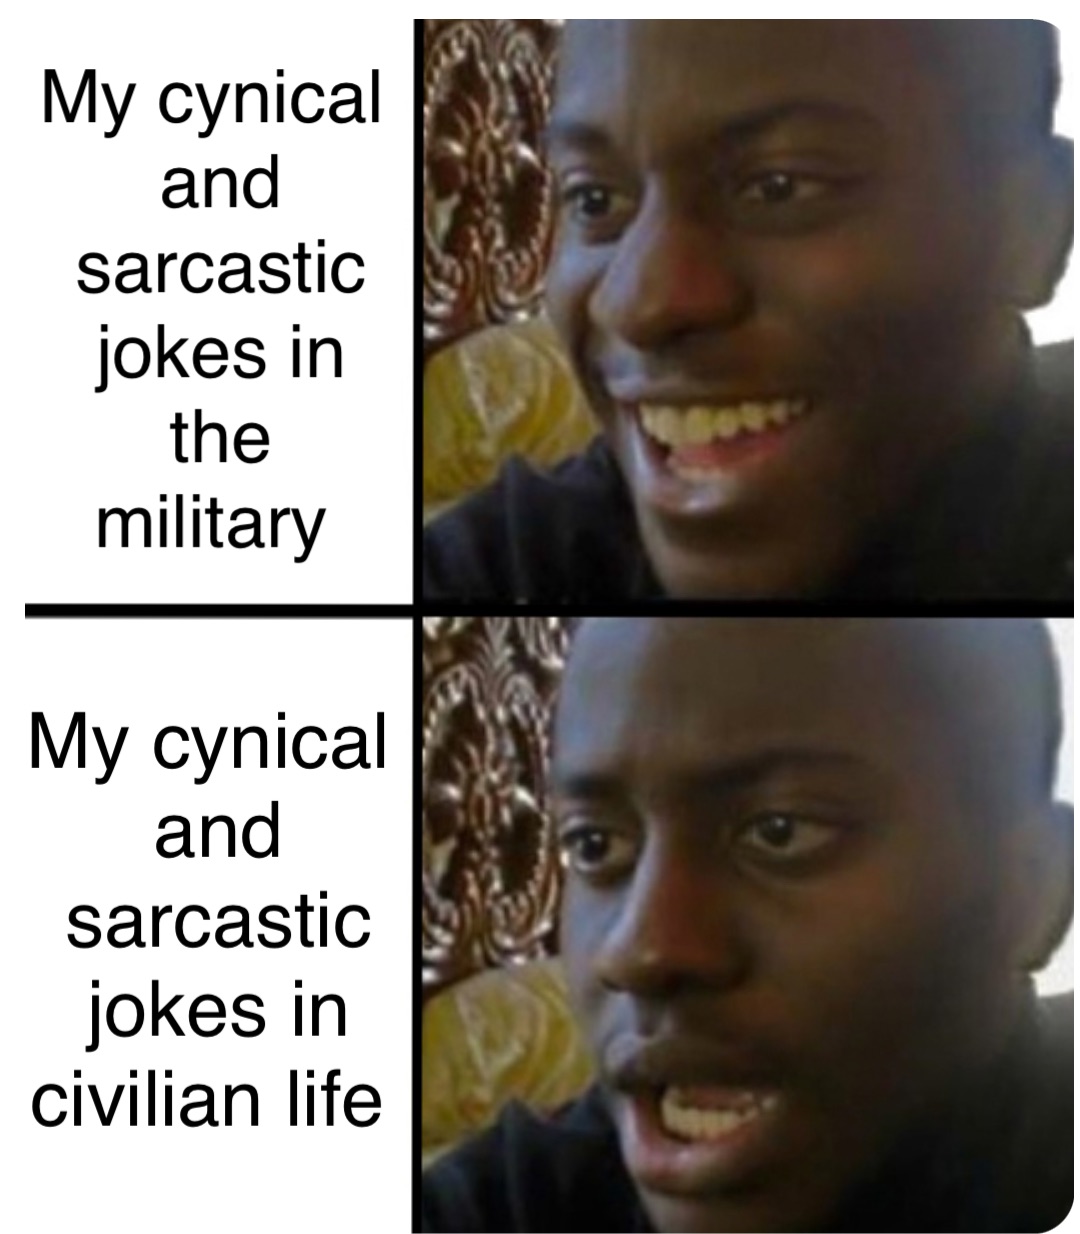 My cynical and sarcastic jokes in the military My cynical and sarcastic jokes in civilian life